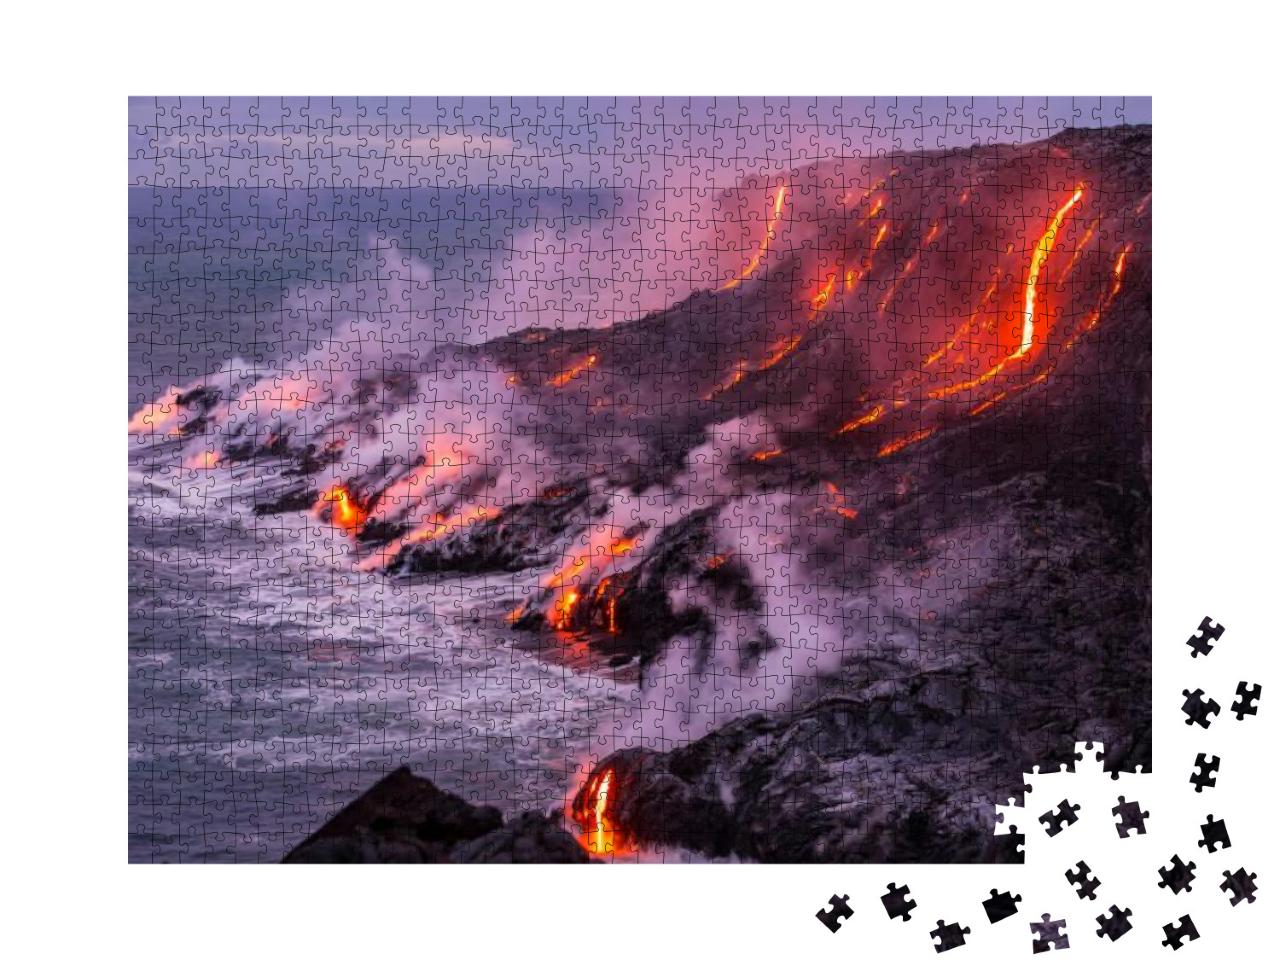 Lava is Entering the Ocean with Many Small Flows... Jigsaw Puzzle with 1000 pieces